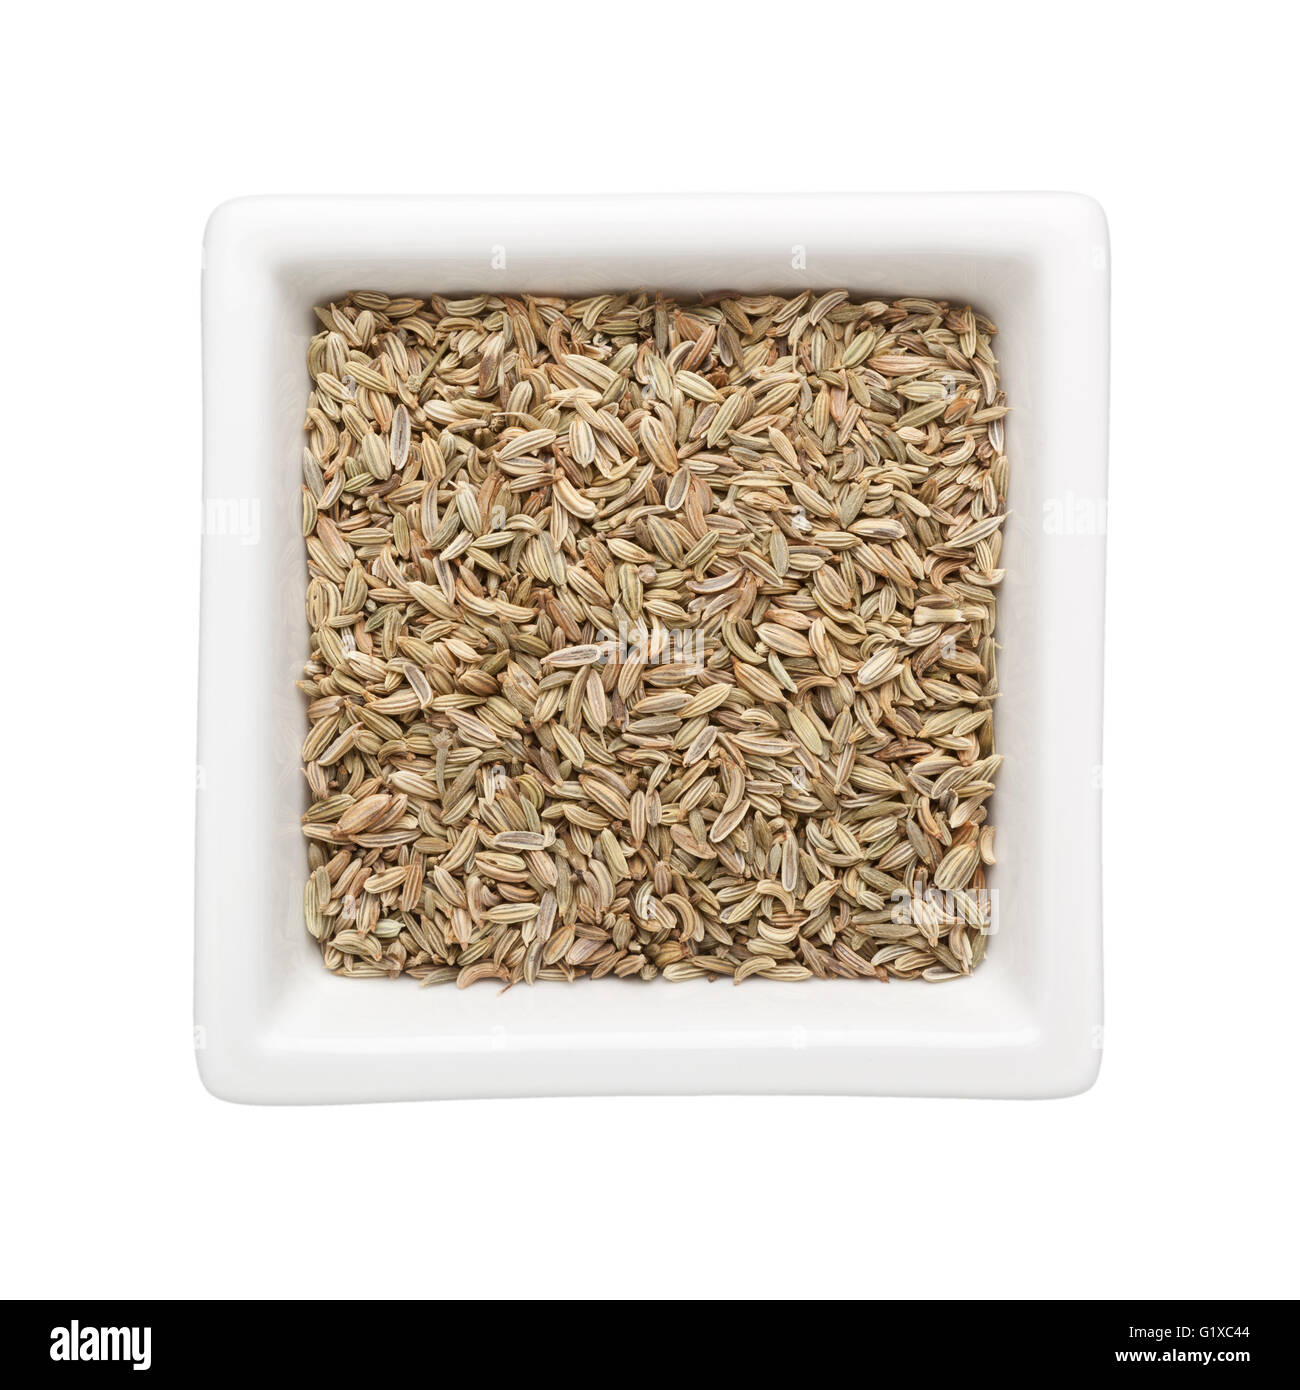 Fennel seeds in a square bowl isolated on white background Stock Photo